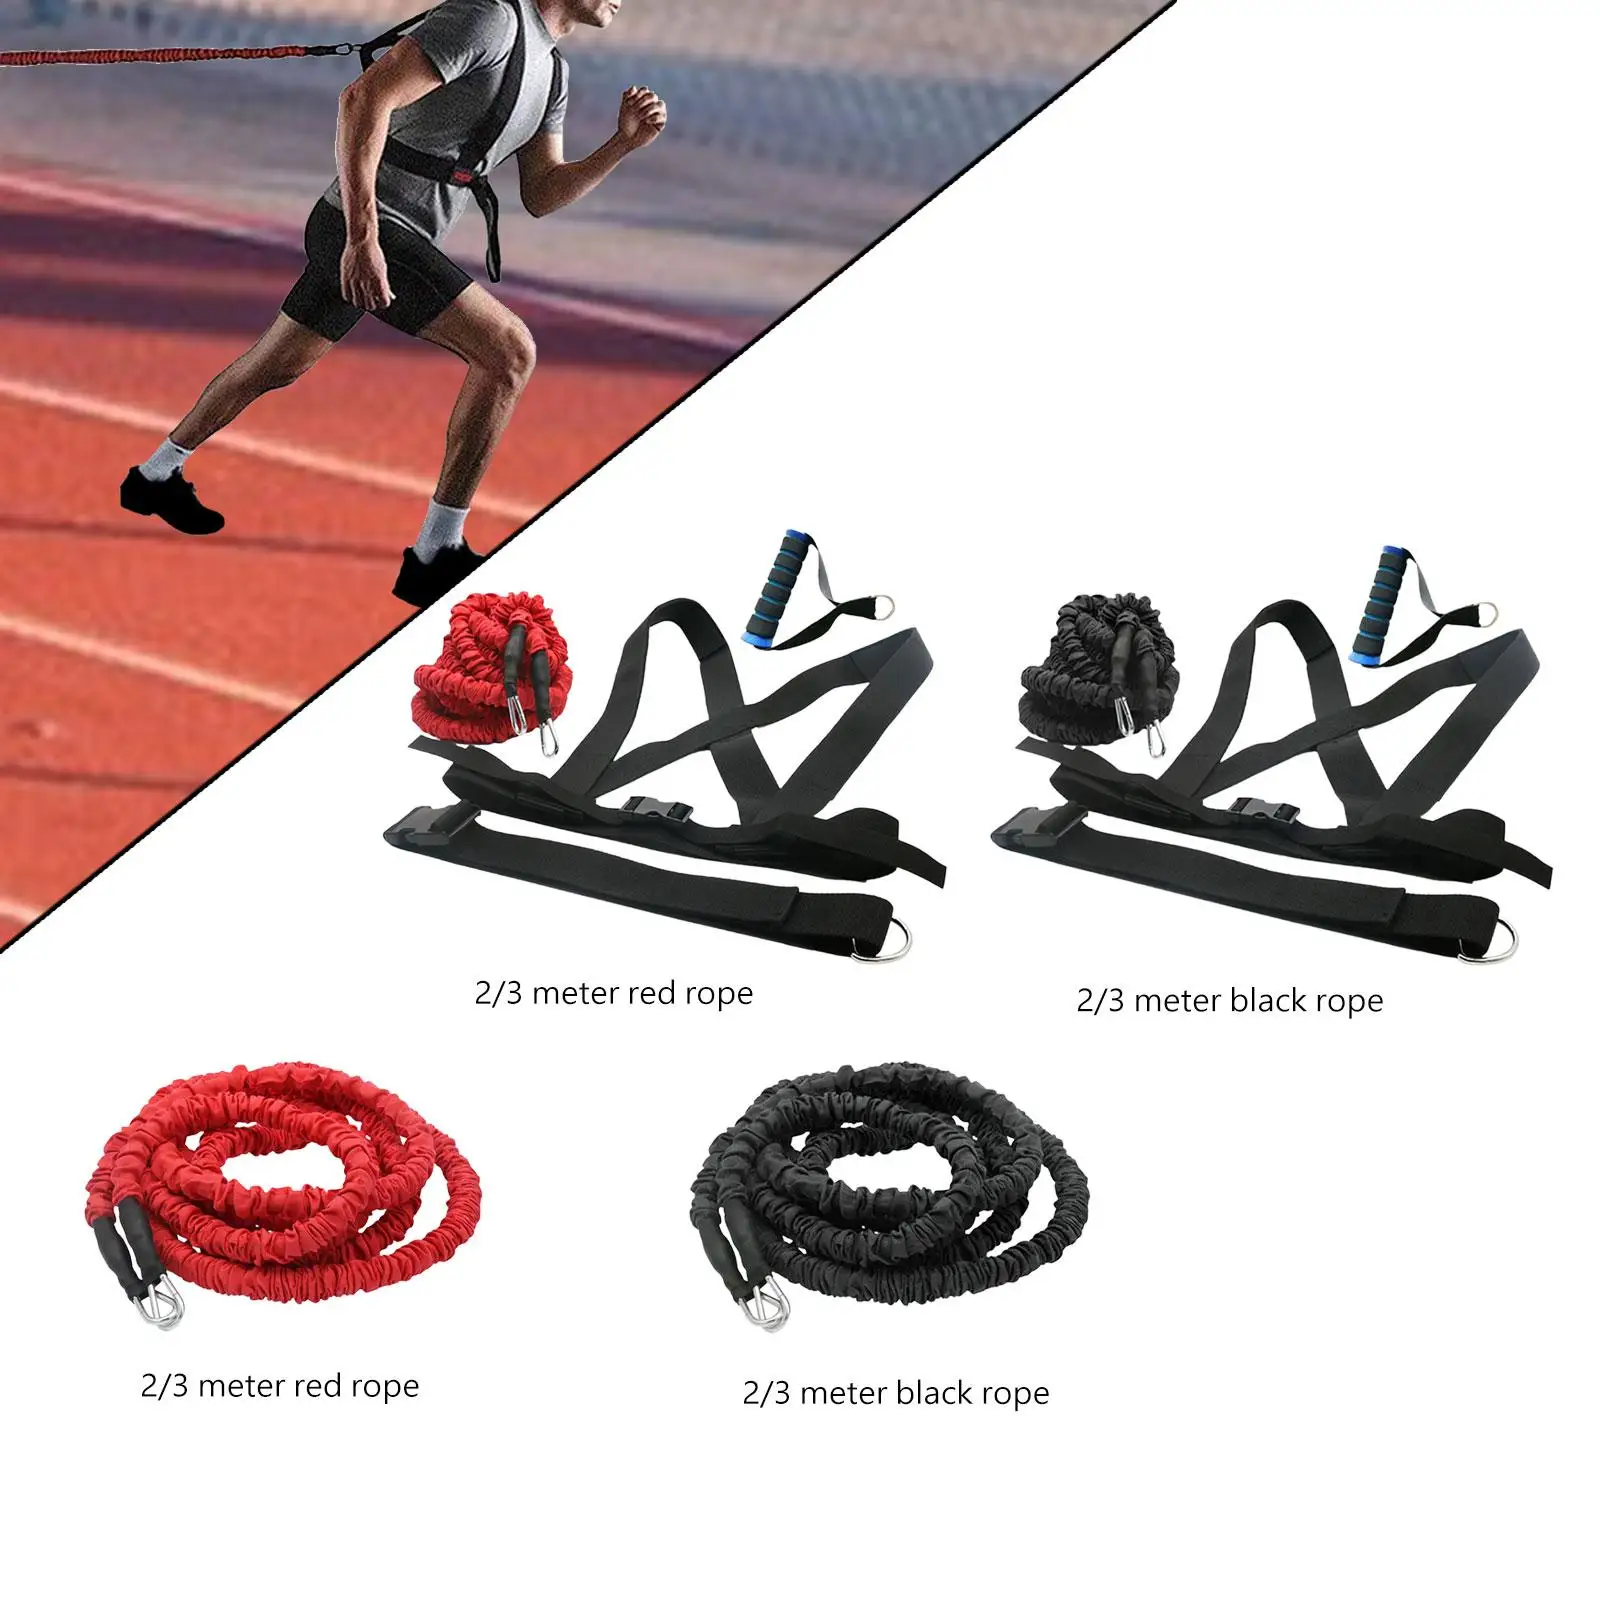 Resistance Explosive Training Rope 50lbs with Handle Men Women Resistance Tube Band for Agility Speed Strength Gym Equipment